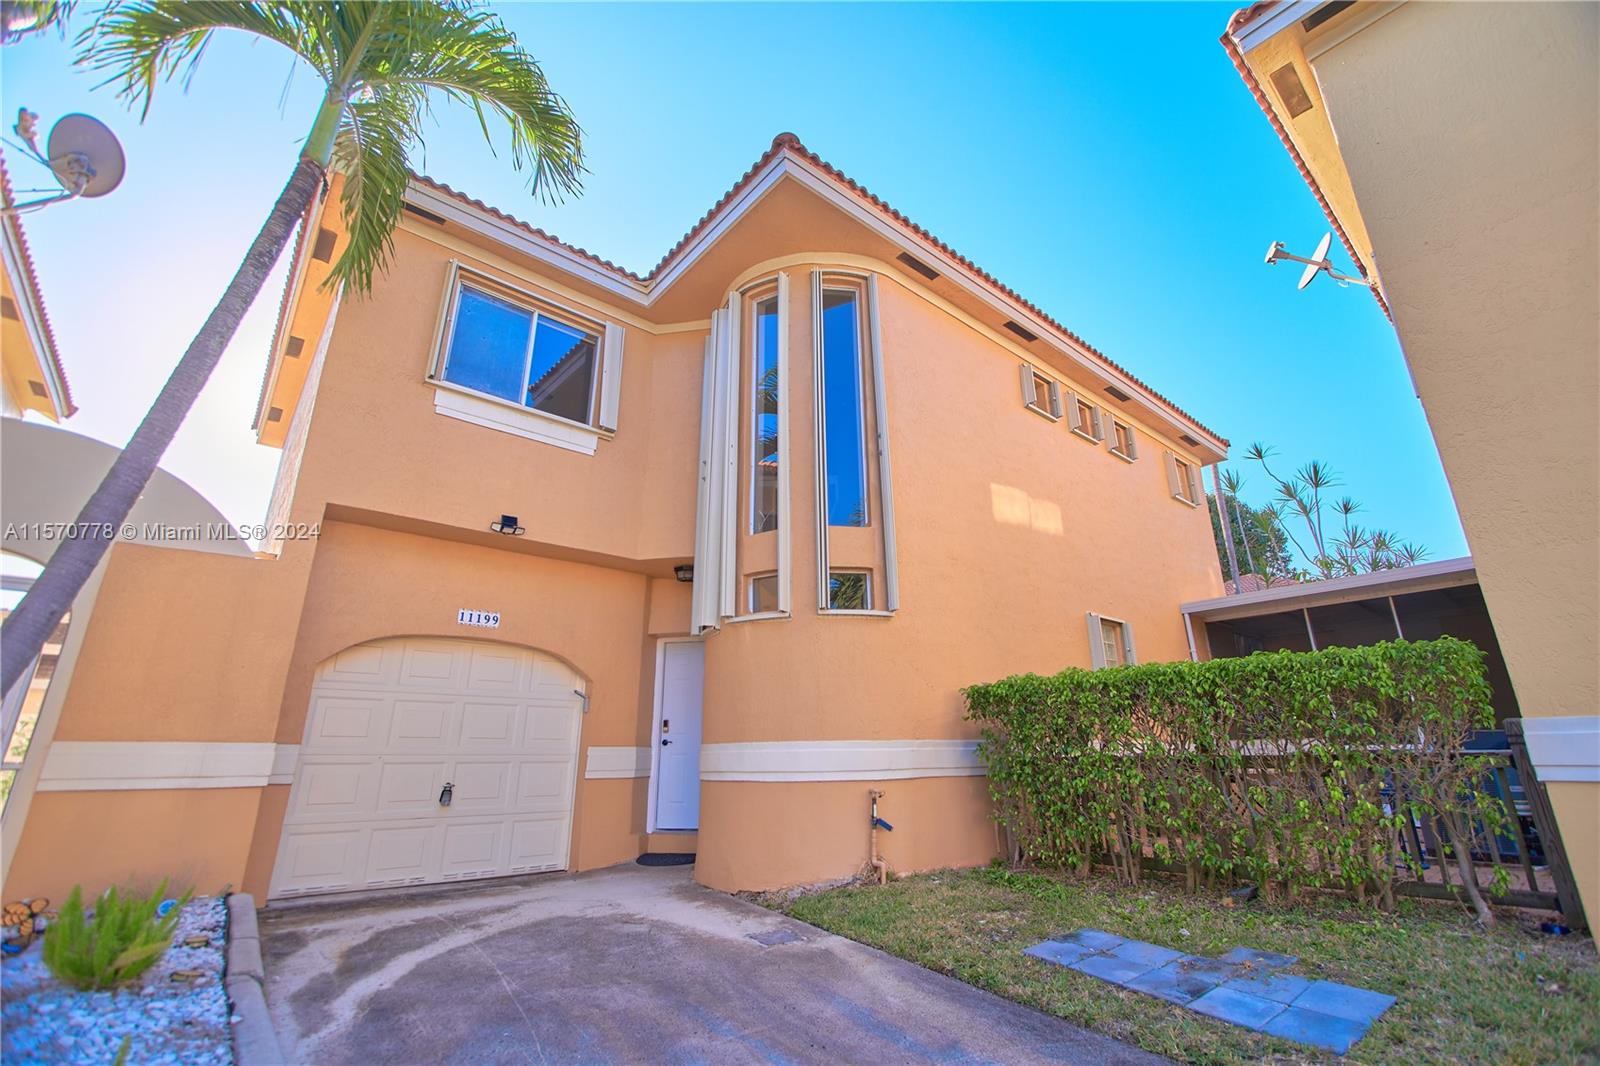 11199 Lakeview Dr, Coral Springs, Broward County, Florida - 4 Bedrooms  
3 Bathrooms - 